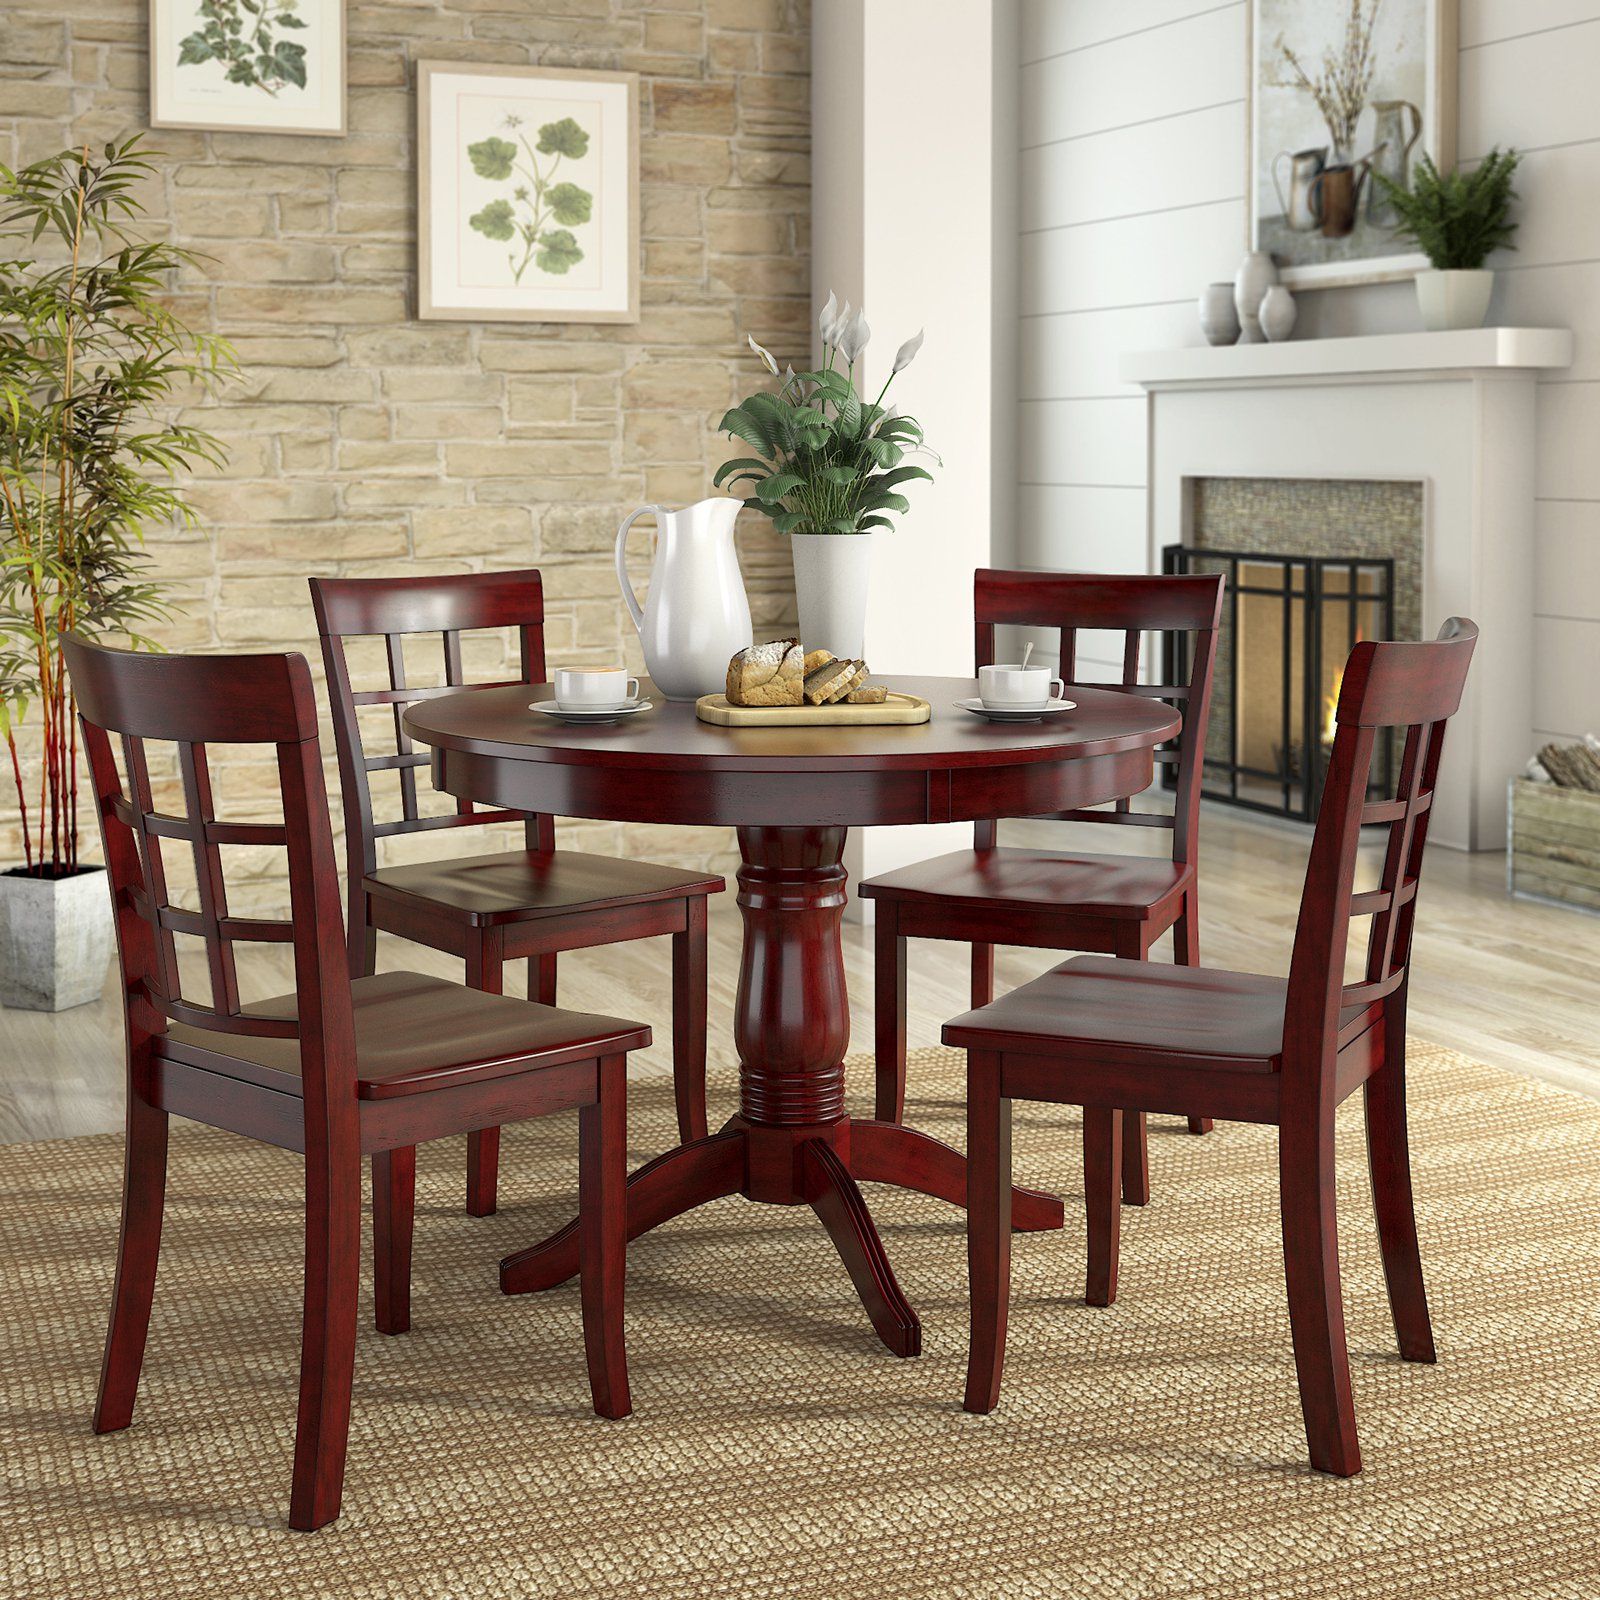 Lexington 5 Piece Wood Dining Set, Round Table And 4 Window Back Chairs Throughout Red 5 Piece Outdoor Dining Sets (View 15 of 15)